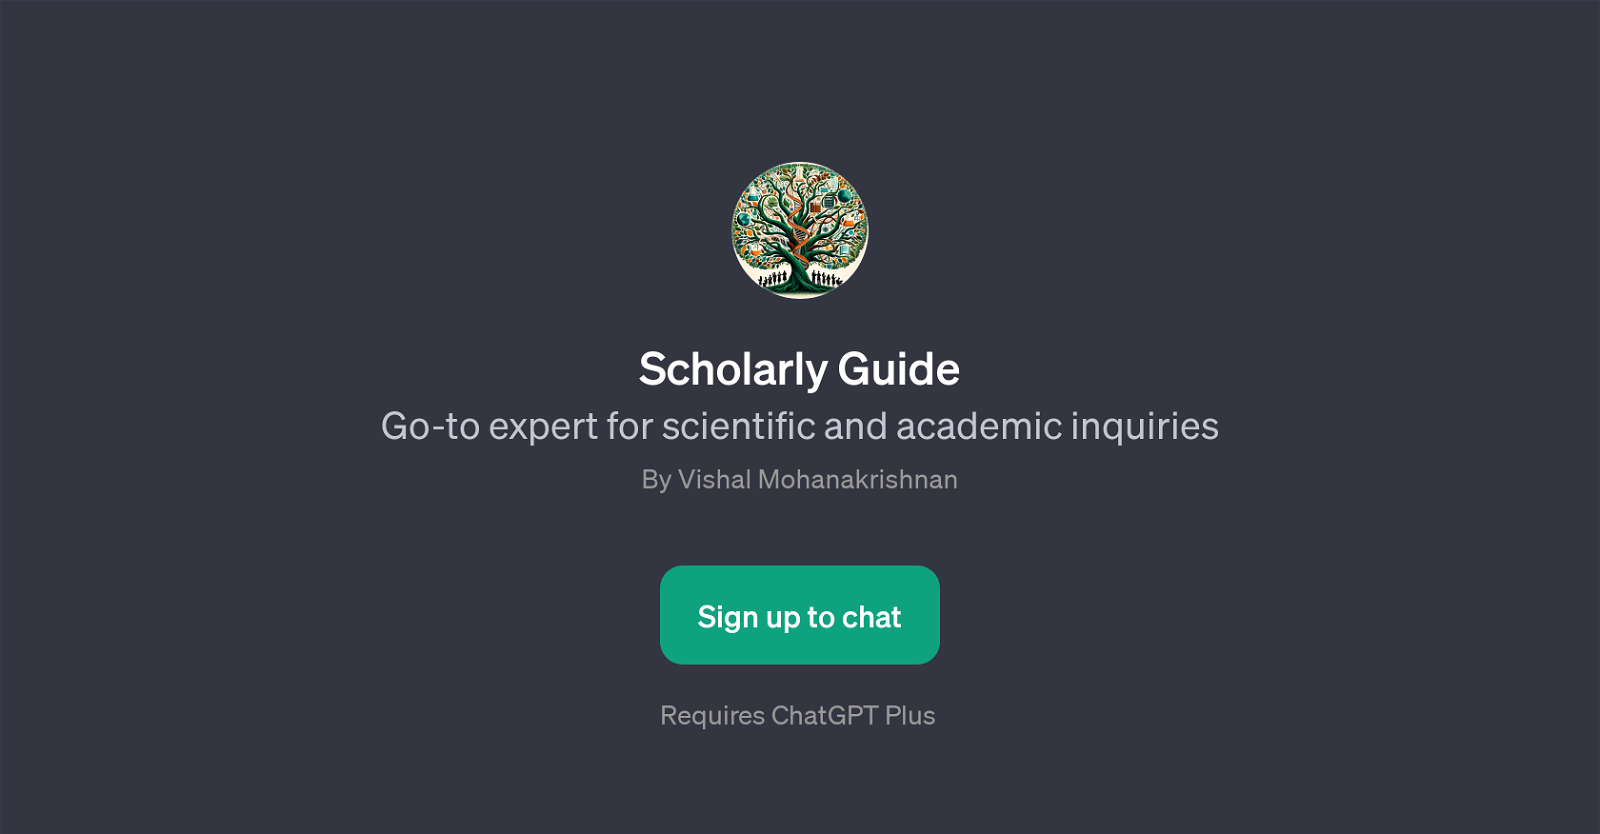 Scholarly Guide website